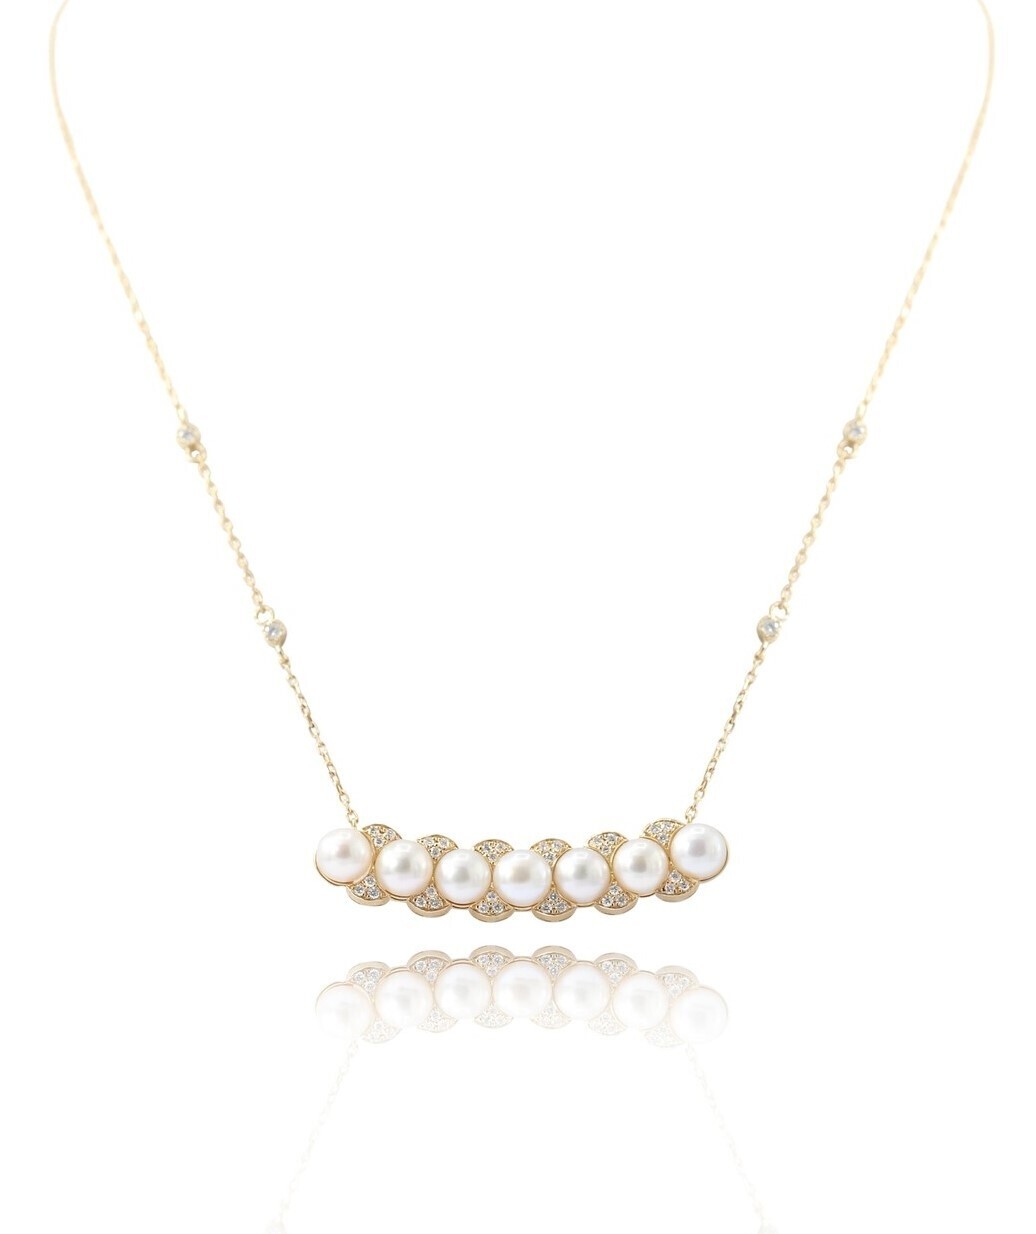 Eternal Diamond Necklace with Pearls